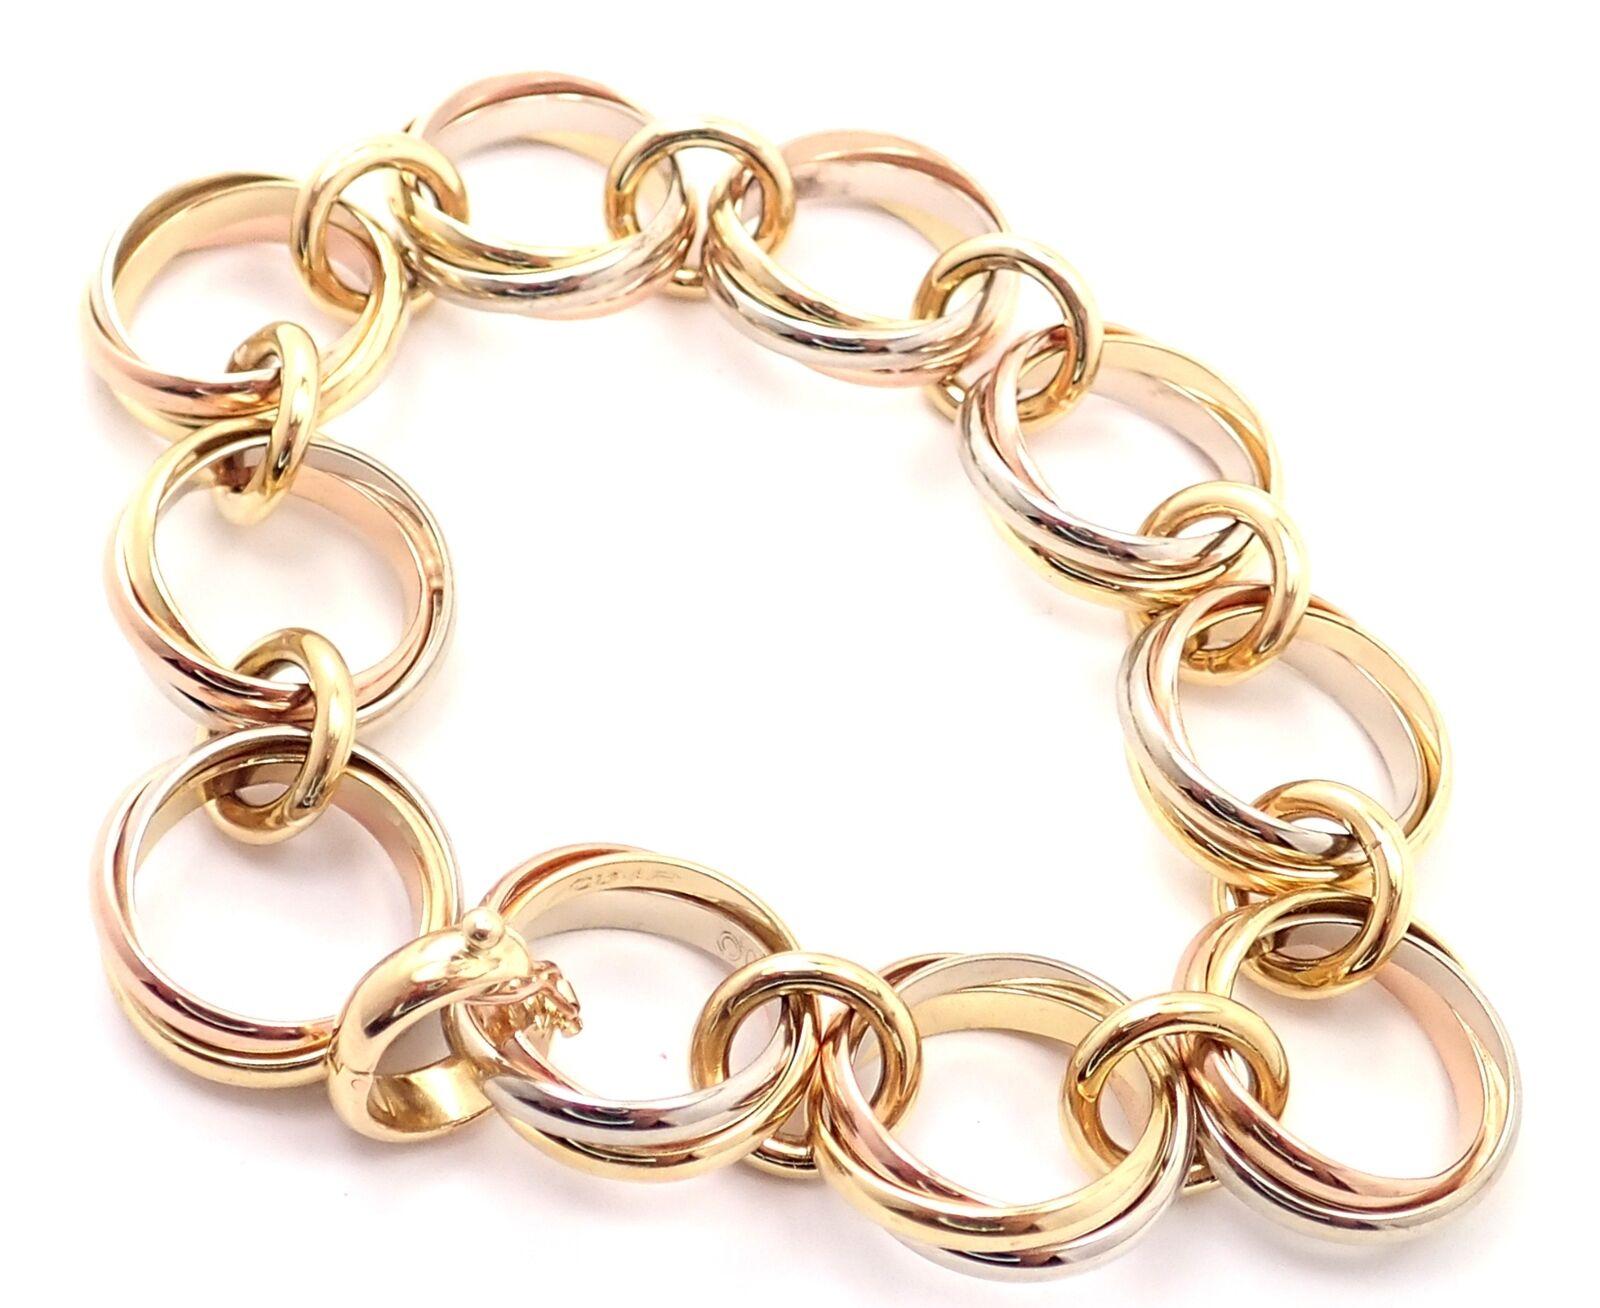 18k Tri-Colored Gold (Yellow, White, Rose) Trinity Wide Round Link Bracelet by Cartier. 
Details: 
Length: 7 3/4